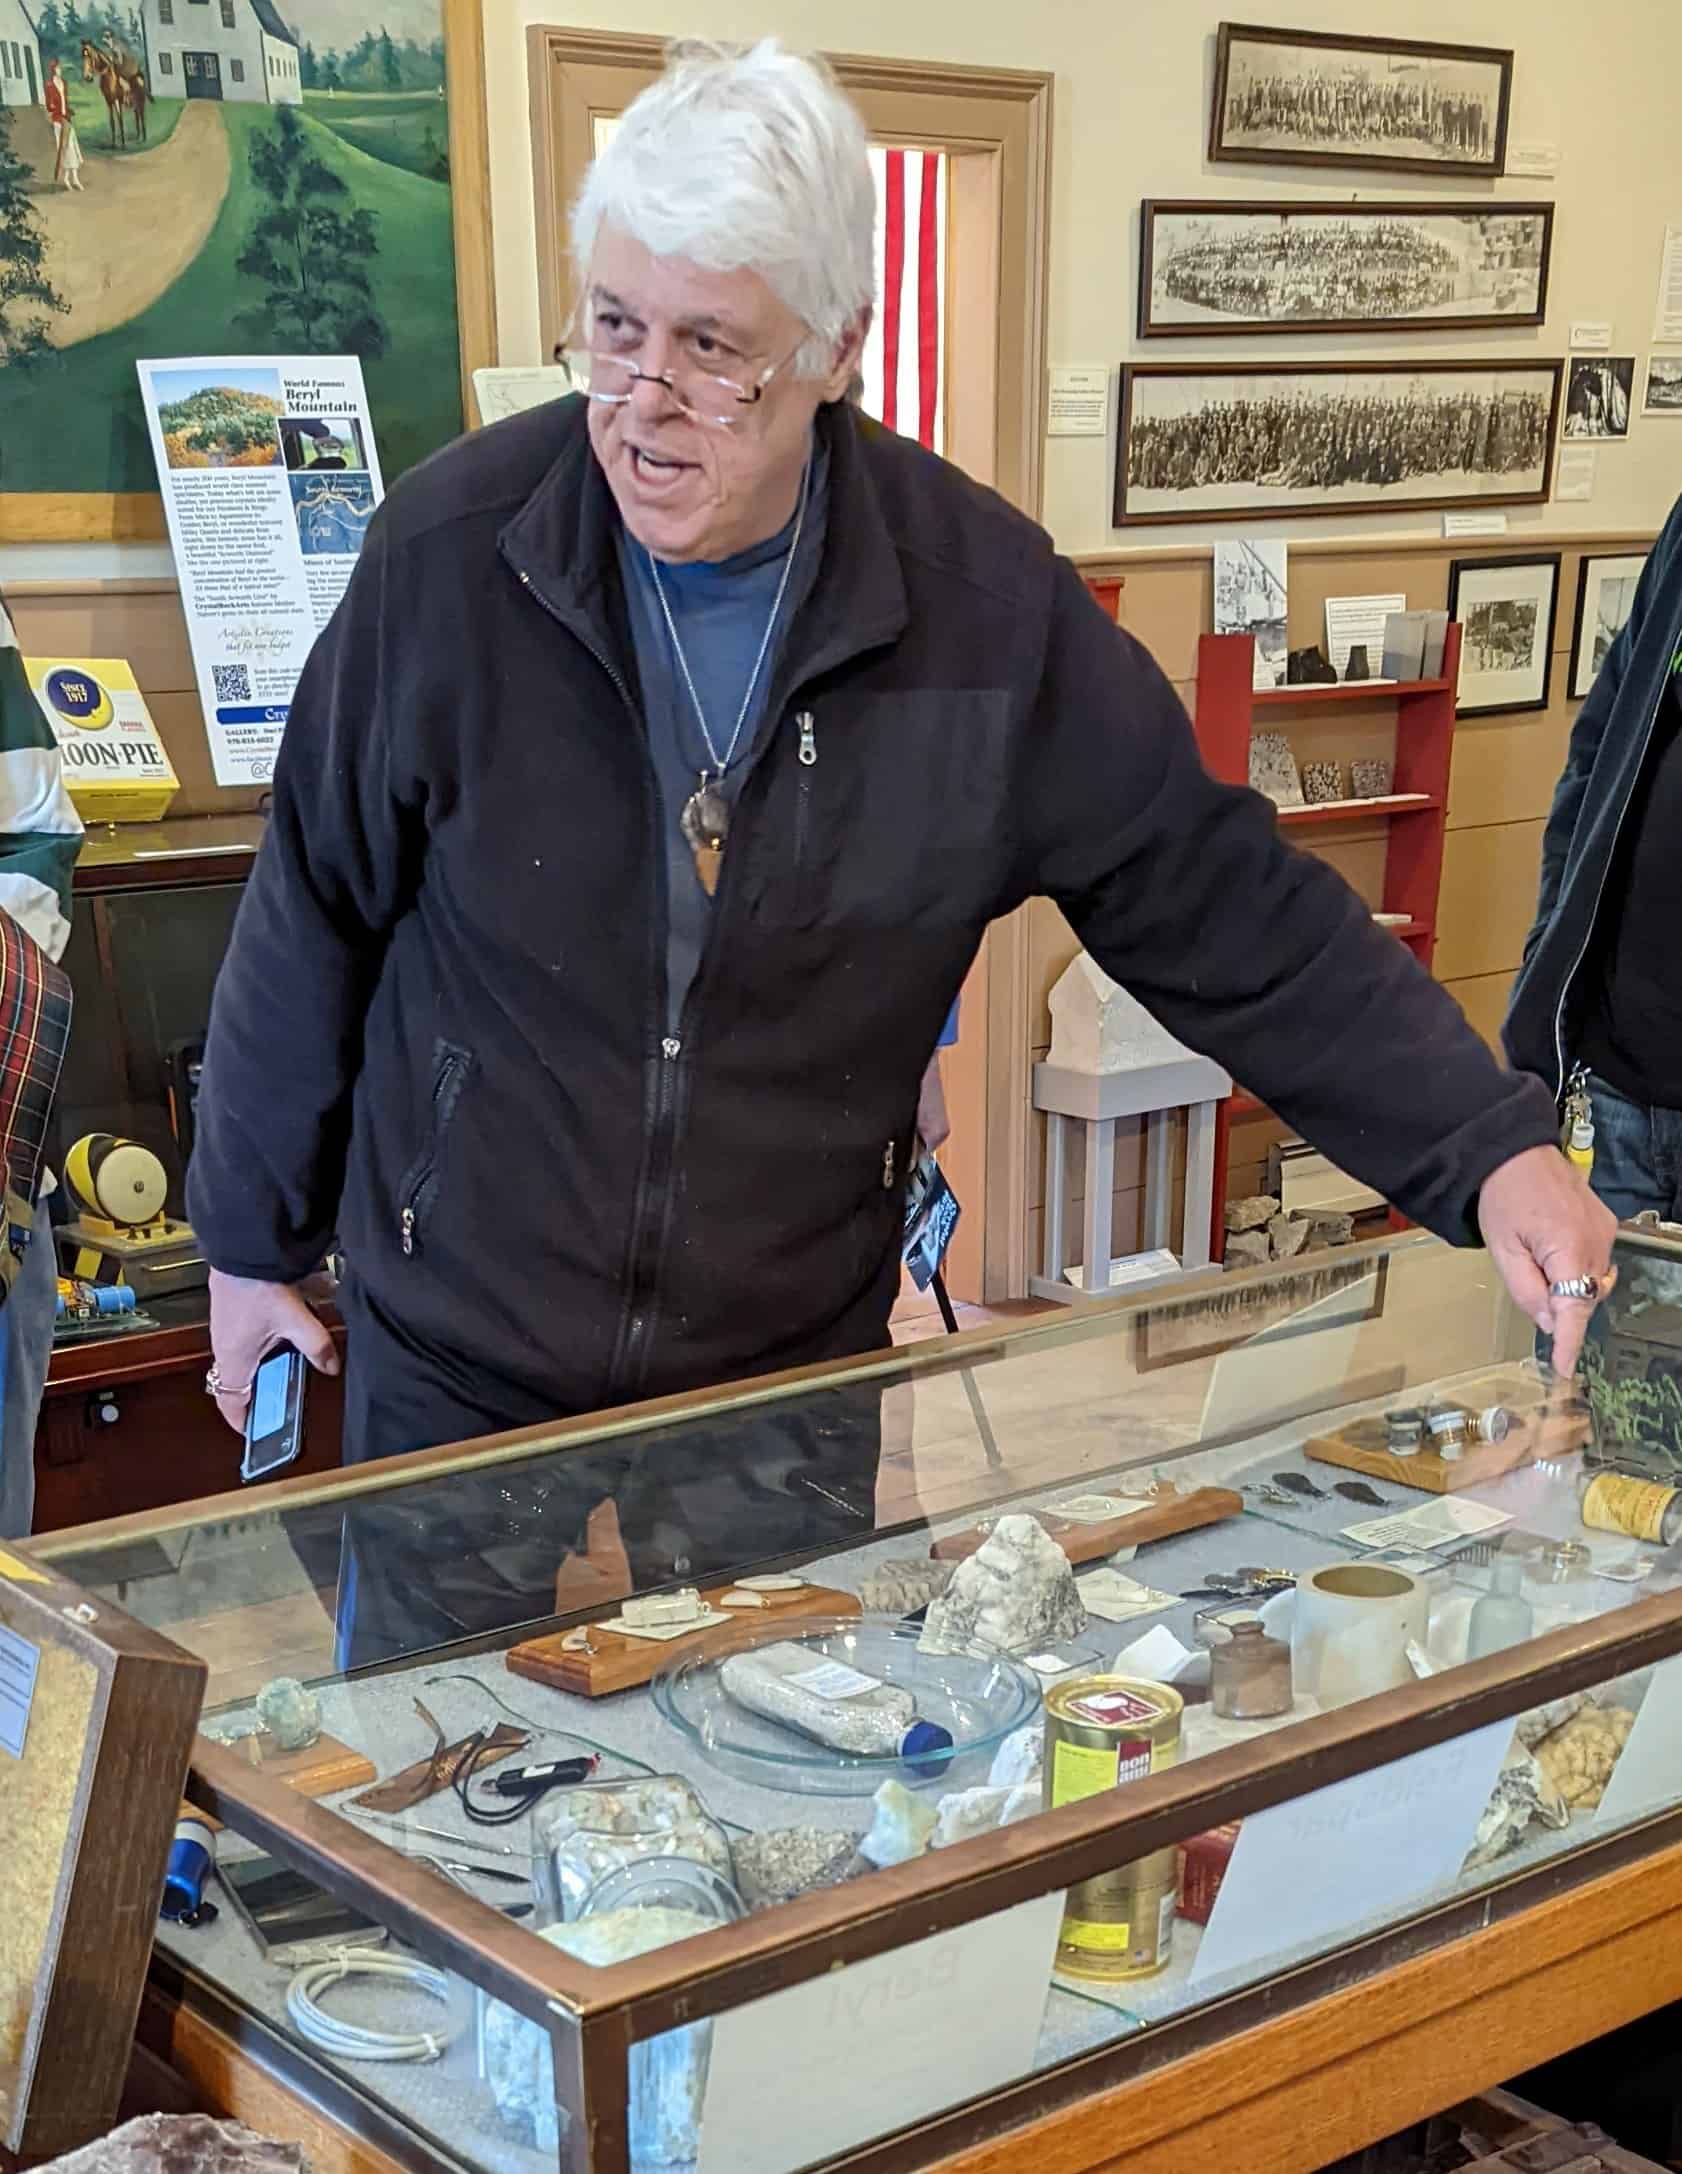 New "Hard Rock Mining" Exhibit at the Westford Museum